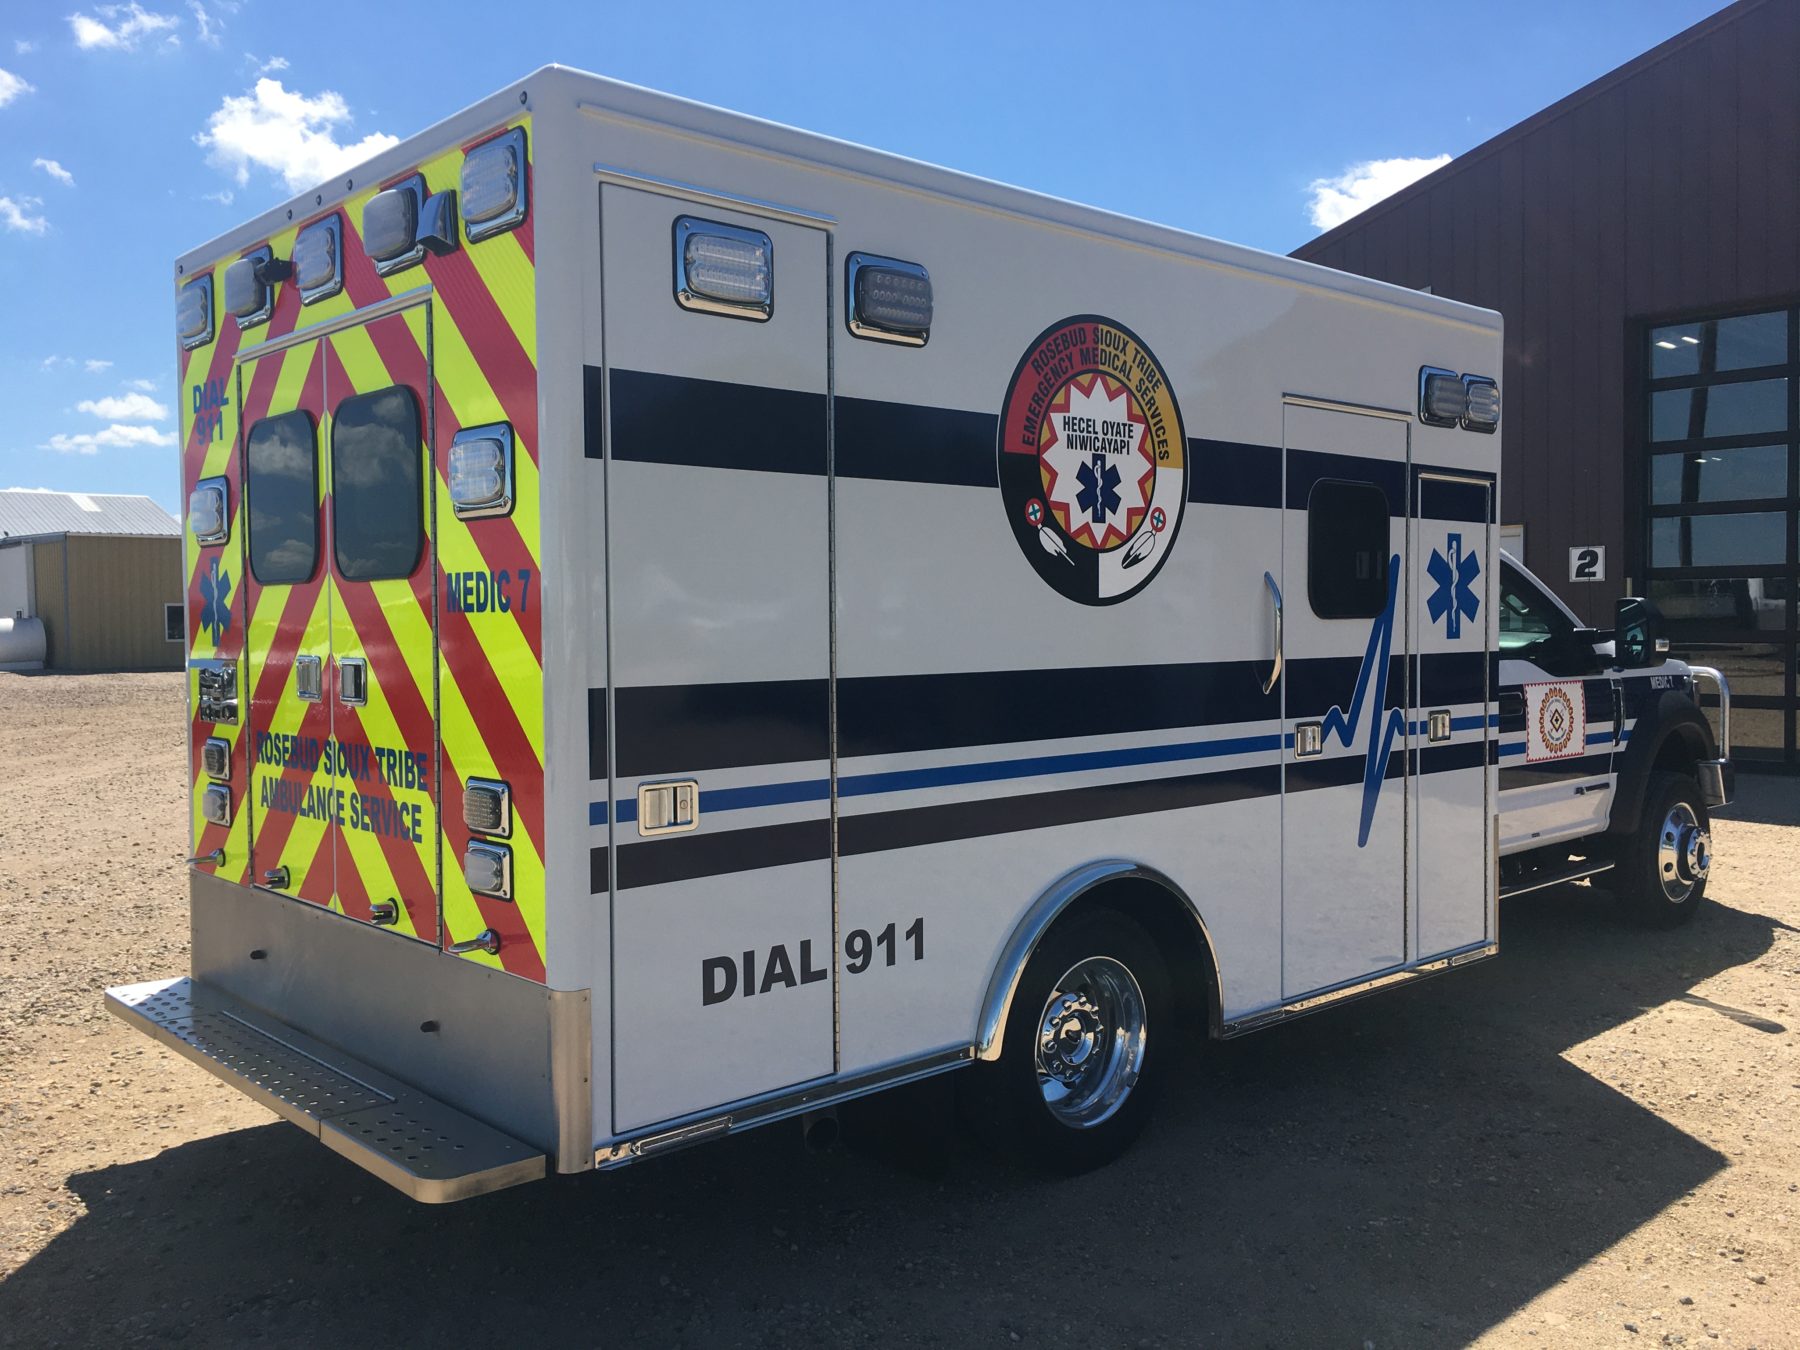 2020 Ford F450 4x4 Heavy Duty Ambulance For Sale – Picture 6